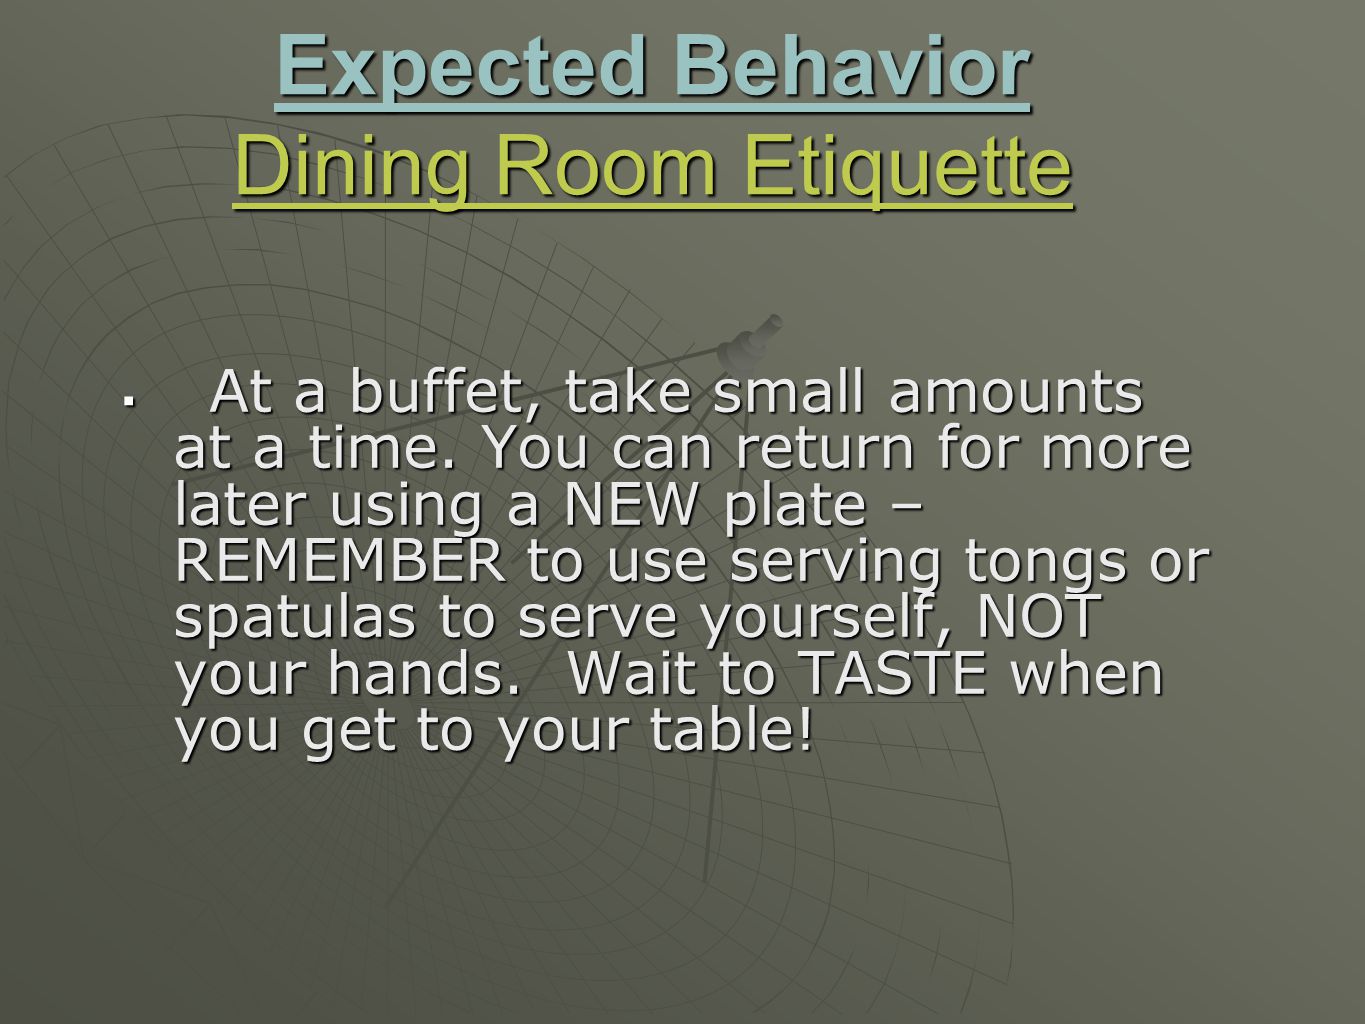 Expected Behavior Dining Room Etiquette  At a buffet, take small amounts at a time.